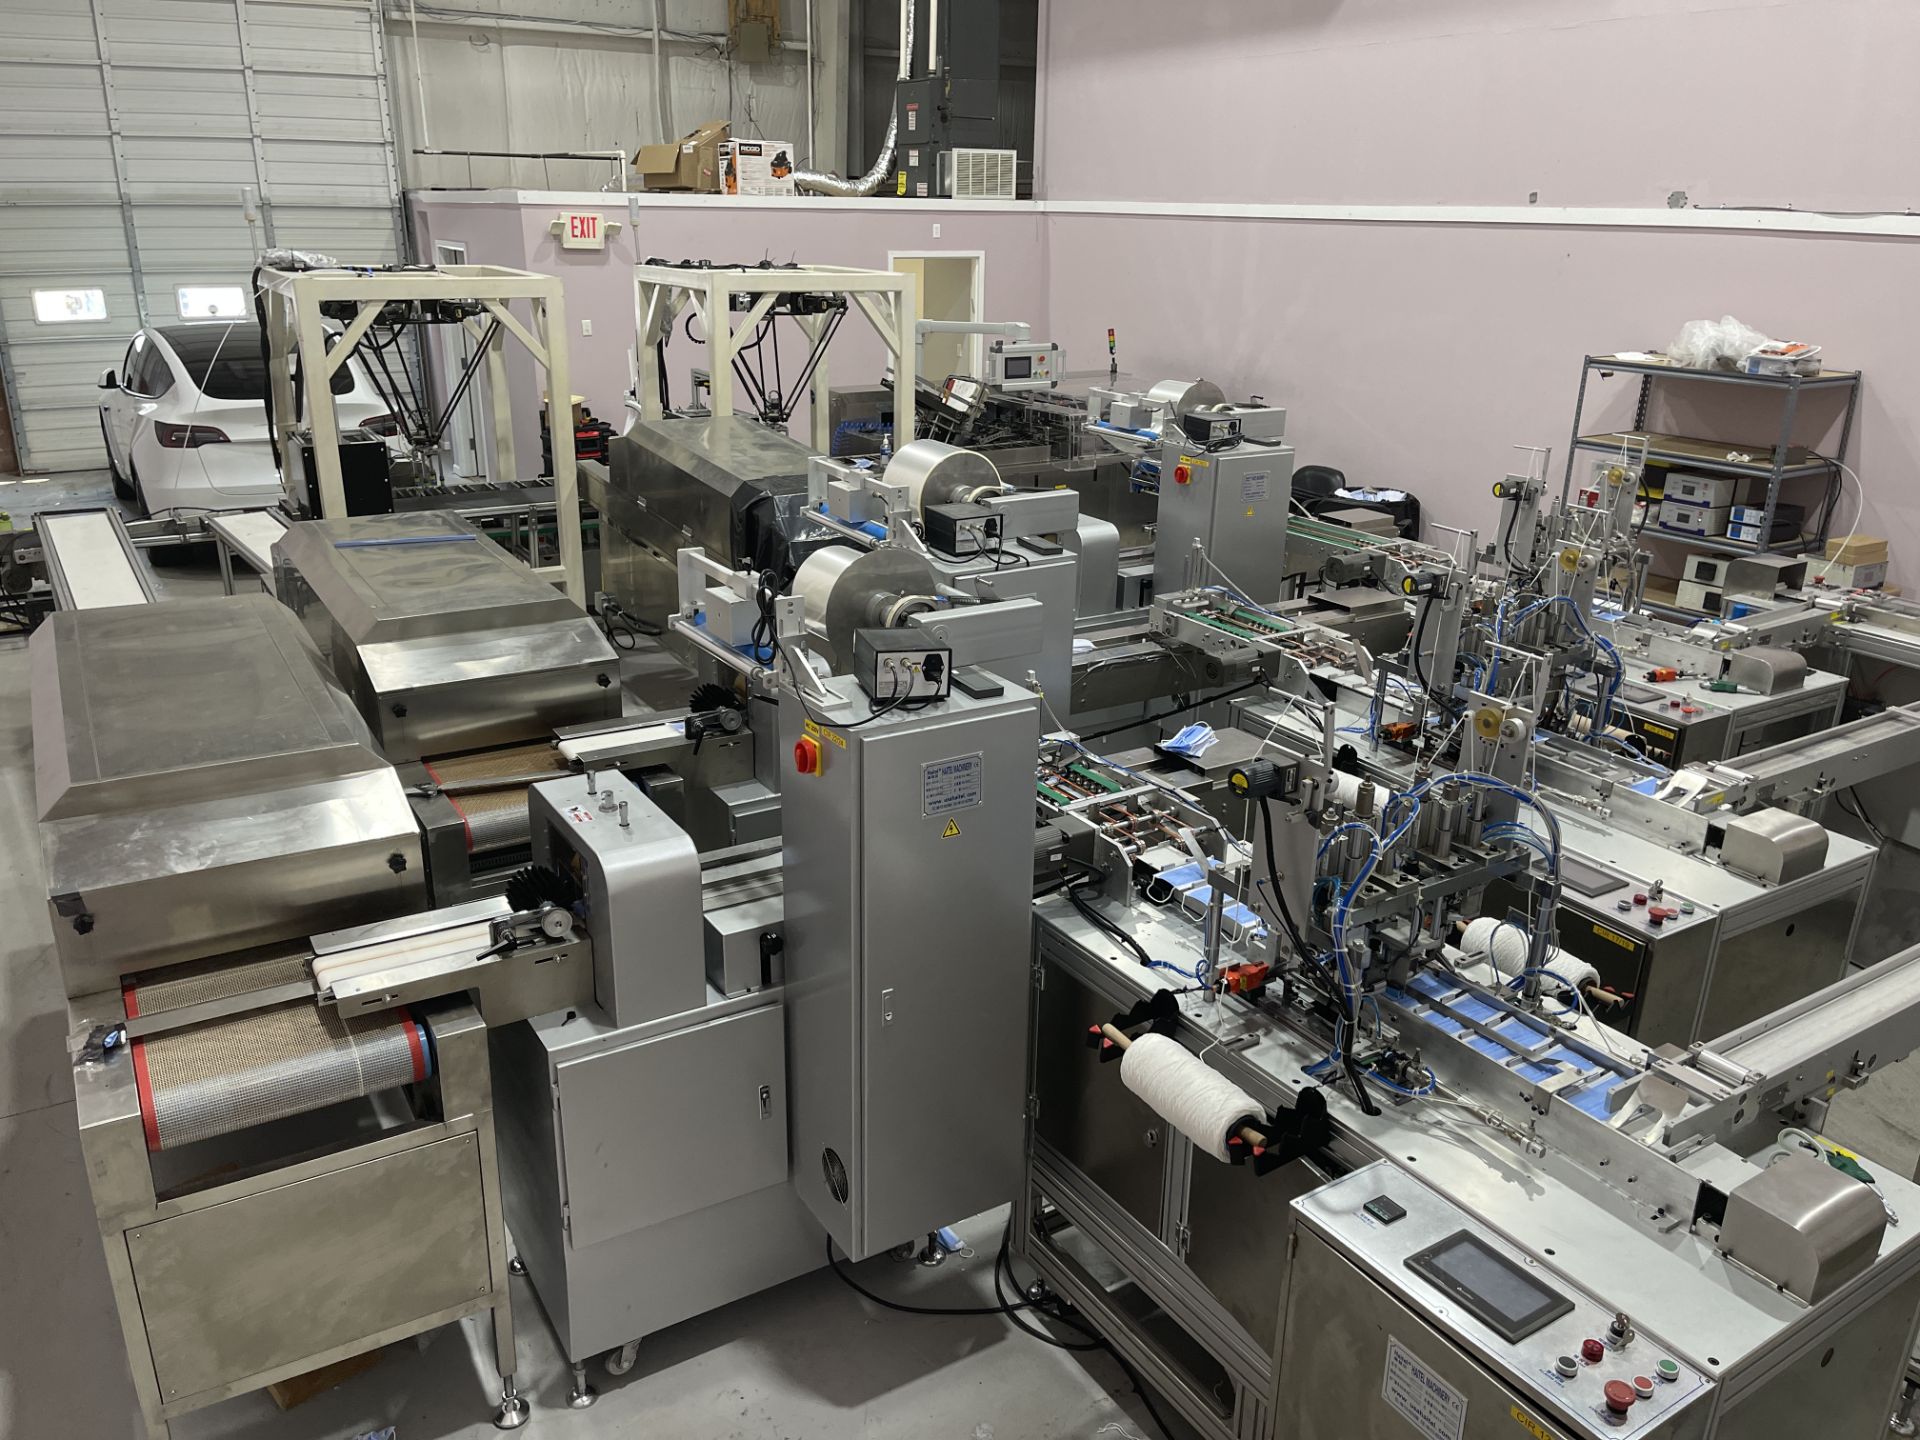 COMPLETE PACKAGE: 2020 3-Ply Disposable Medical Mask Assembly & Packaging Line Equipment, Includes: - Image 67 of 150